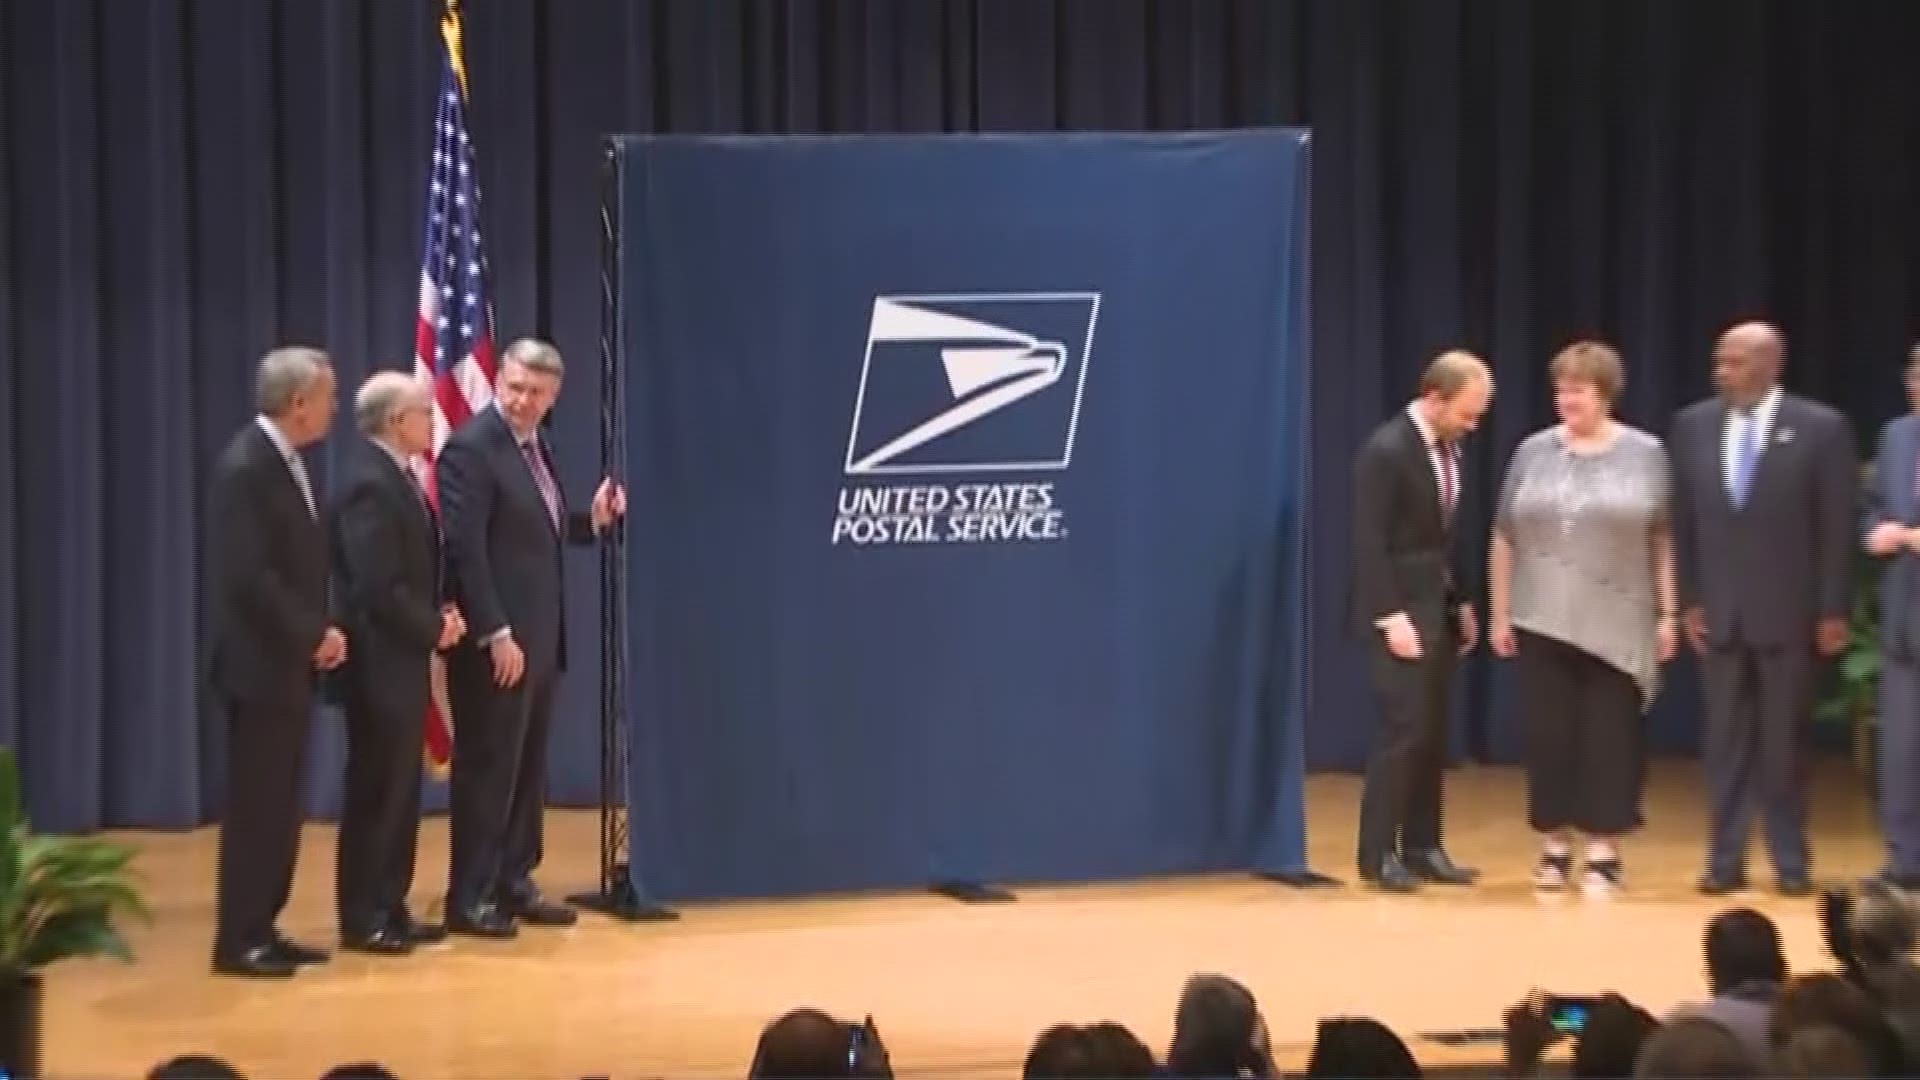 The U.S. Postal Service held a ceremony to unveil their forever stamp honoring former President George H.W Bush at the Bush Center in College Station.